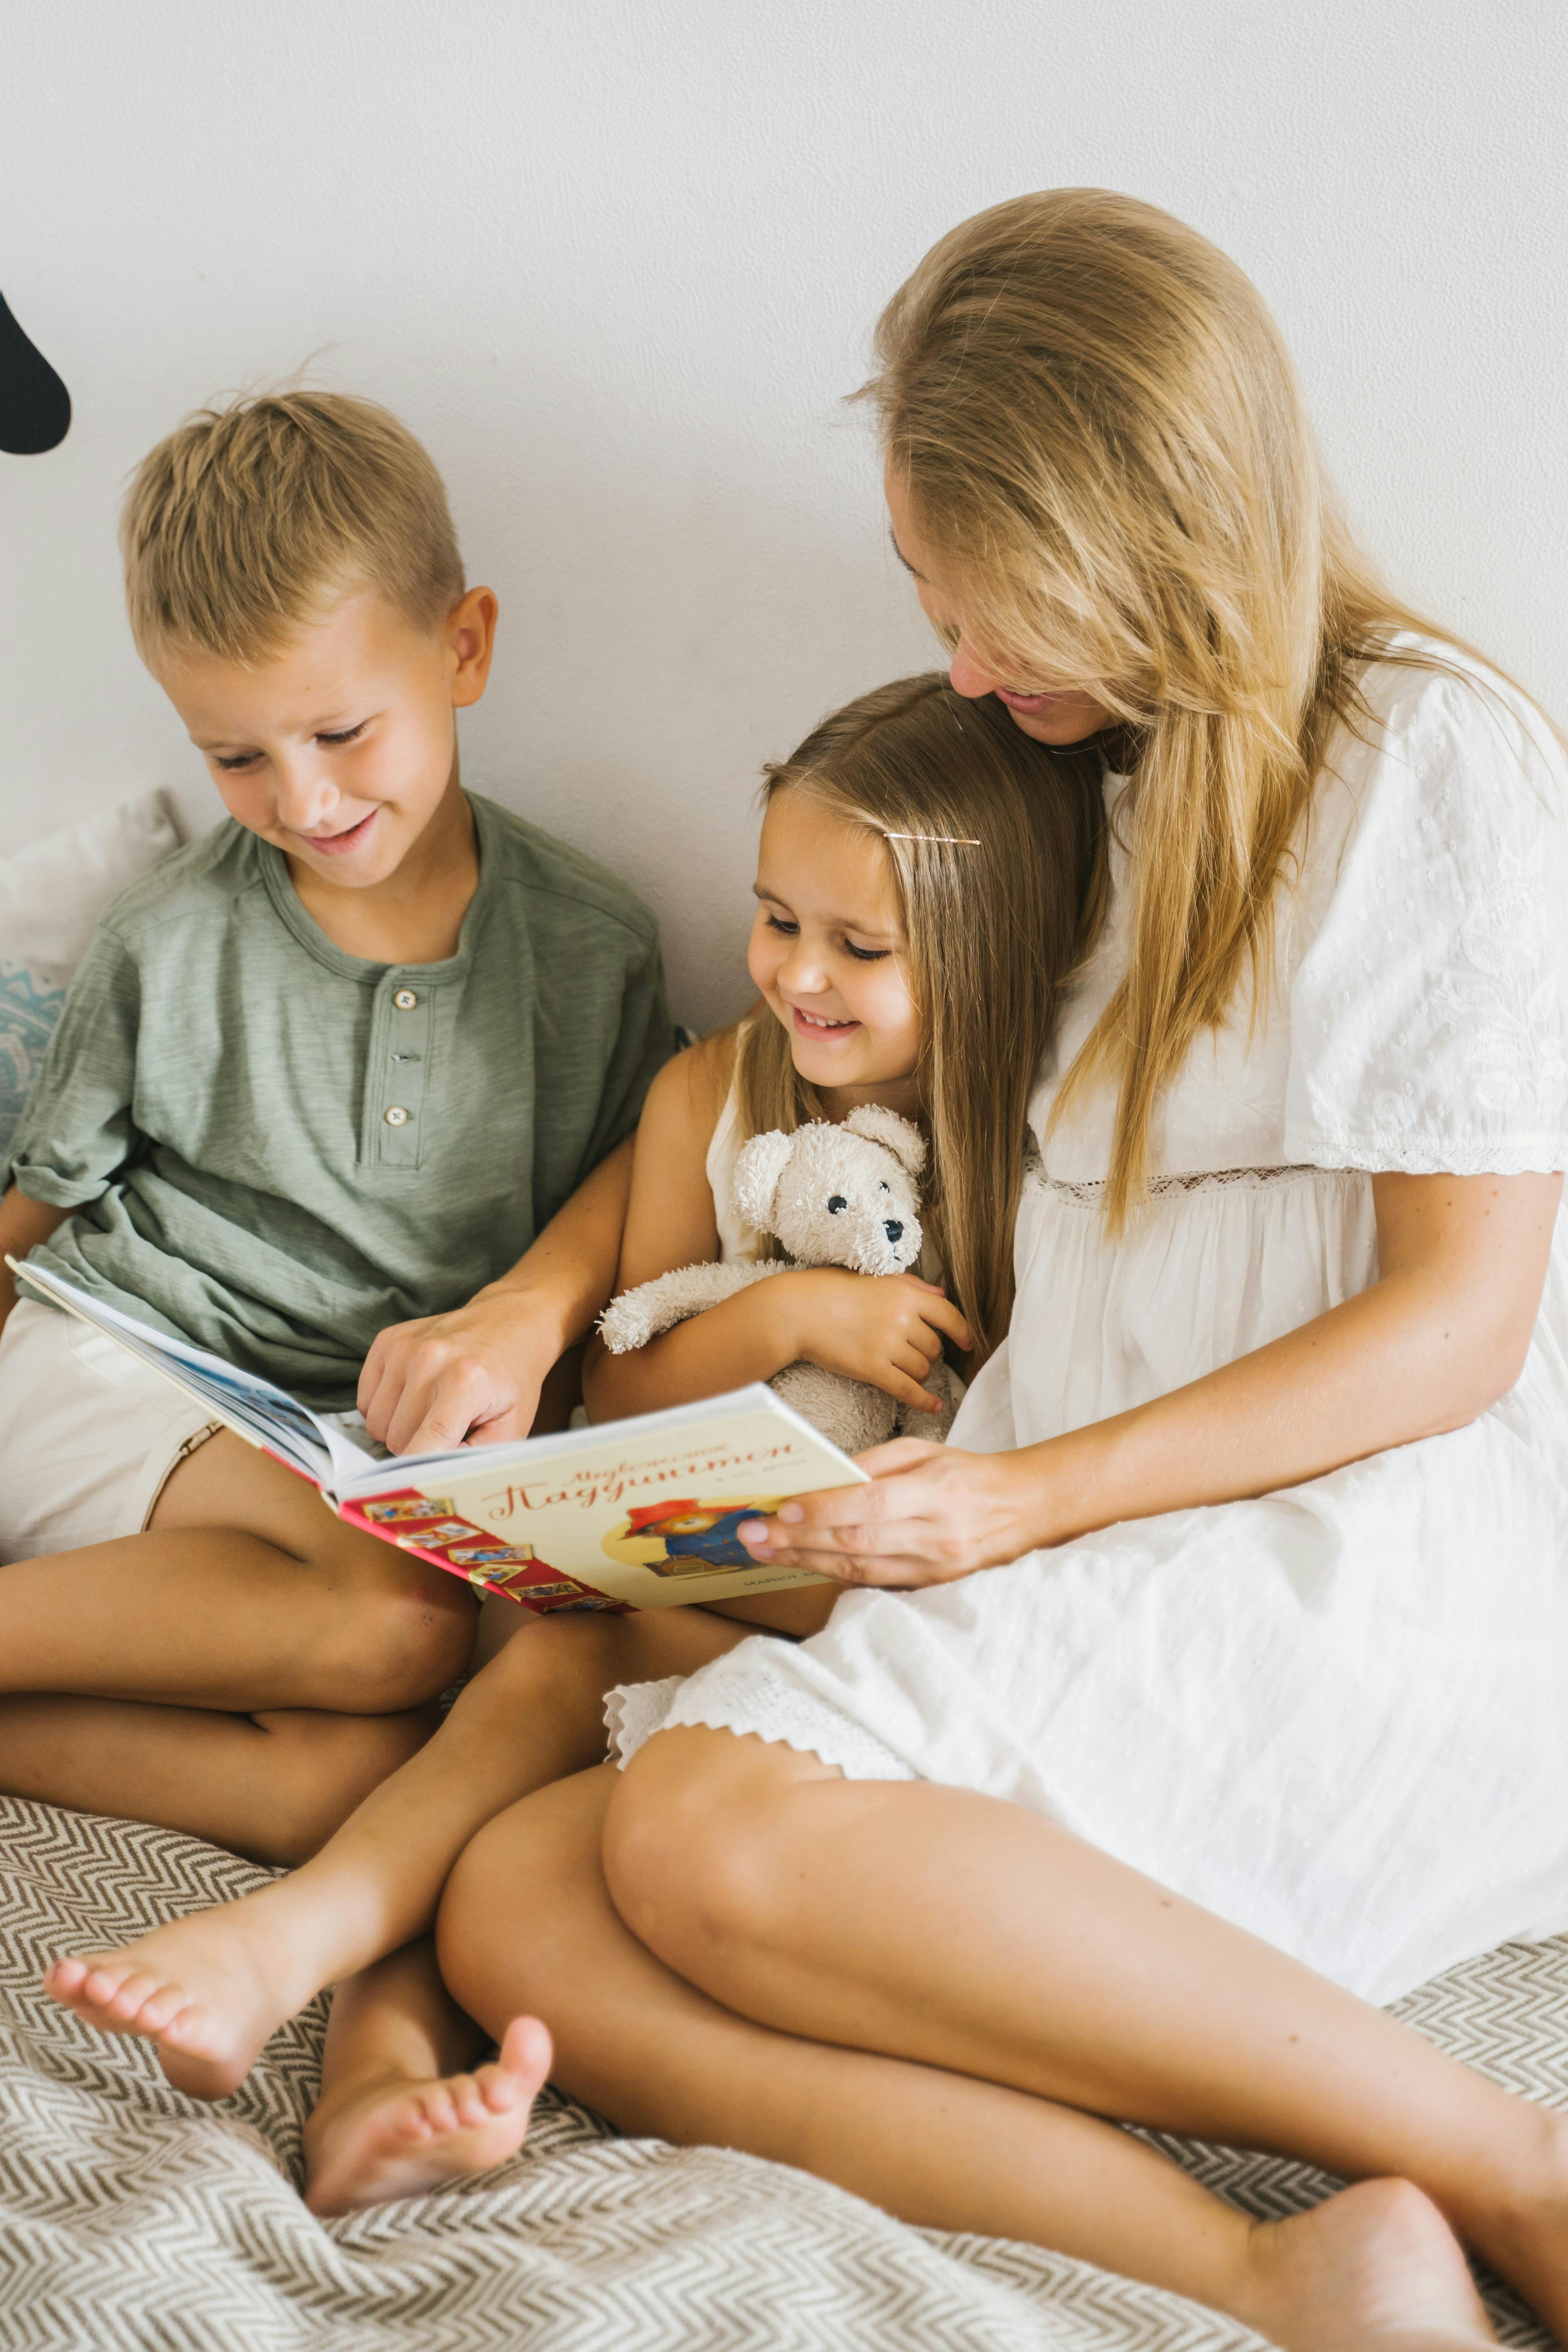 A woman reading a book to two children | Source: Pexels